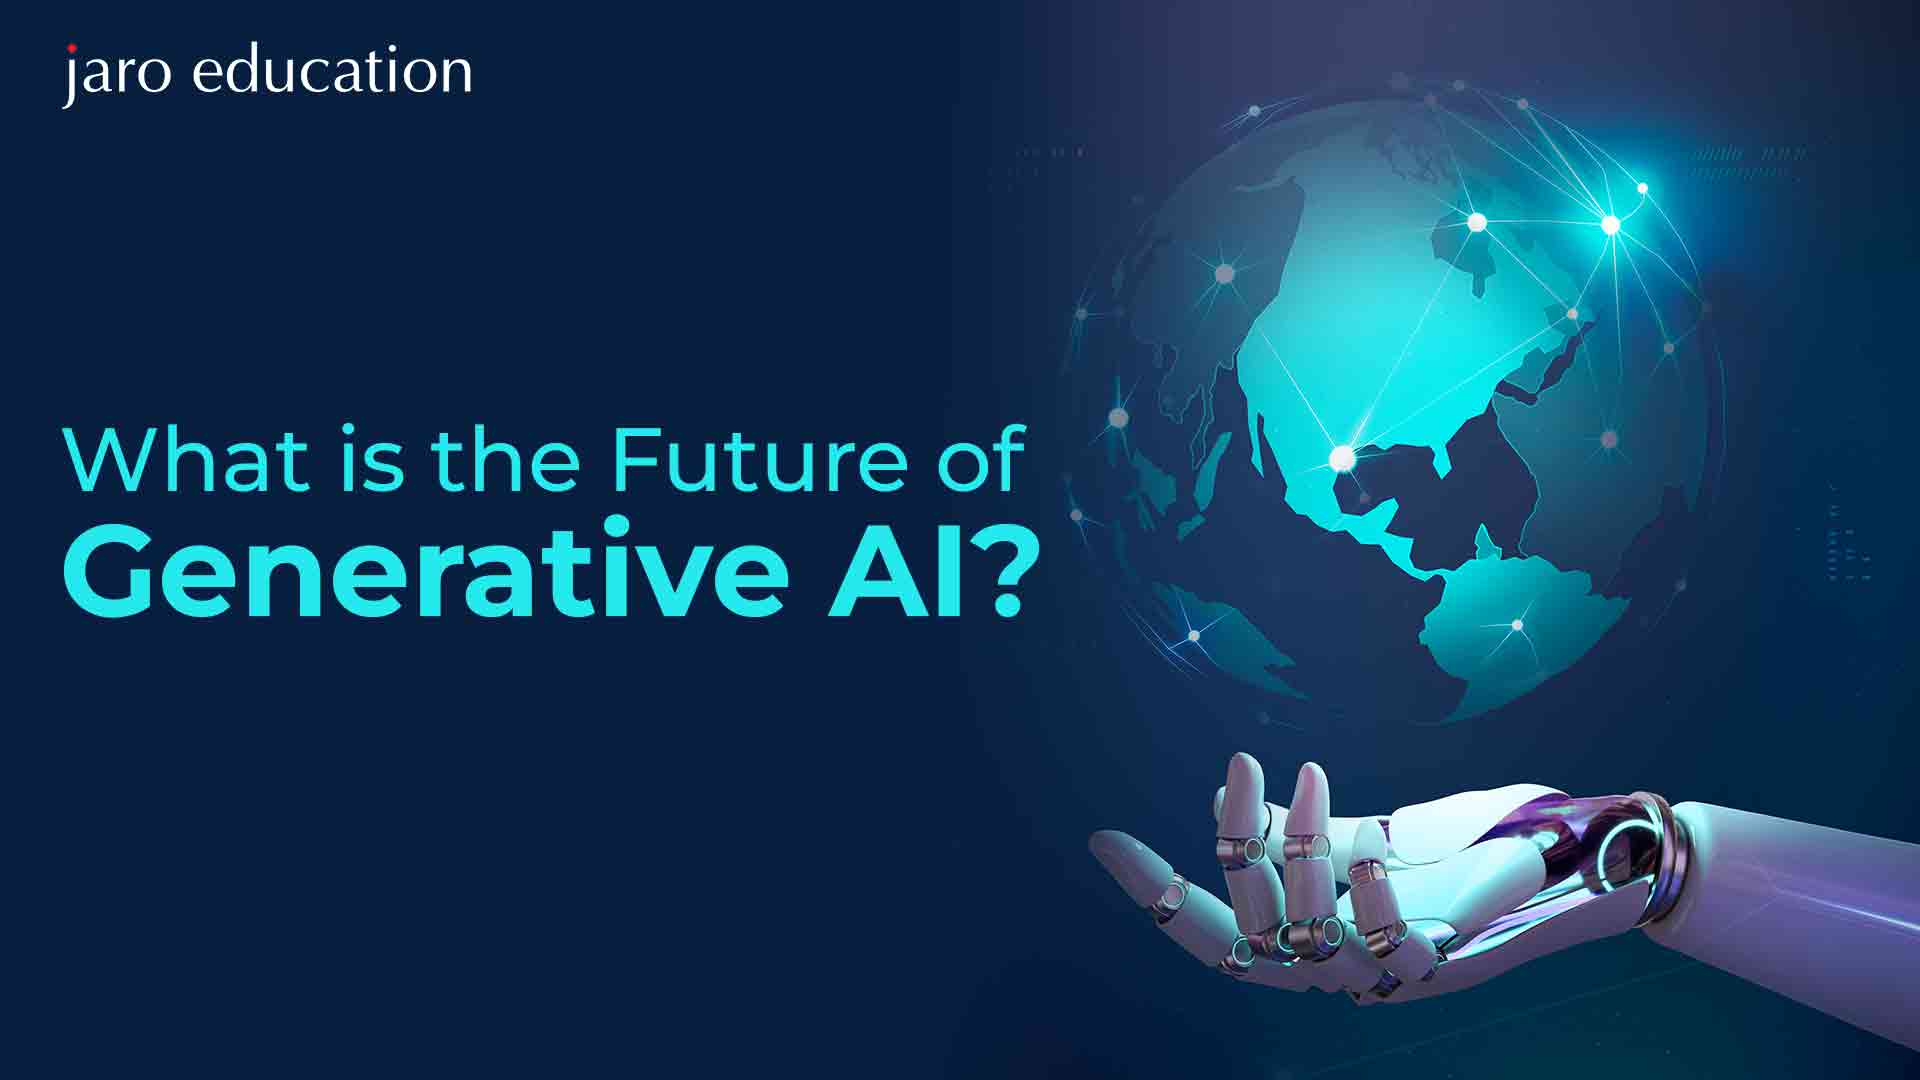 What is the Future of Generative AI